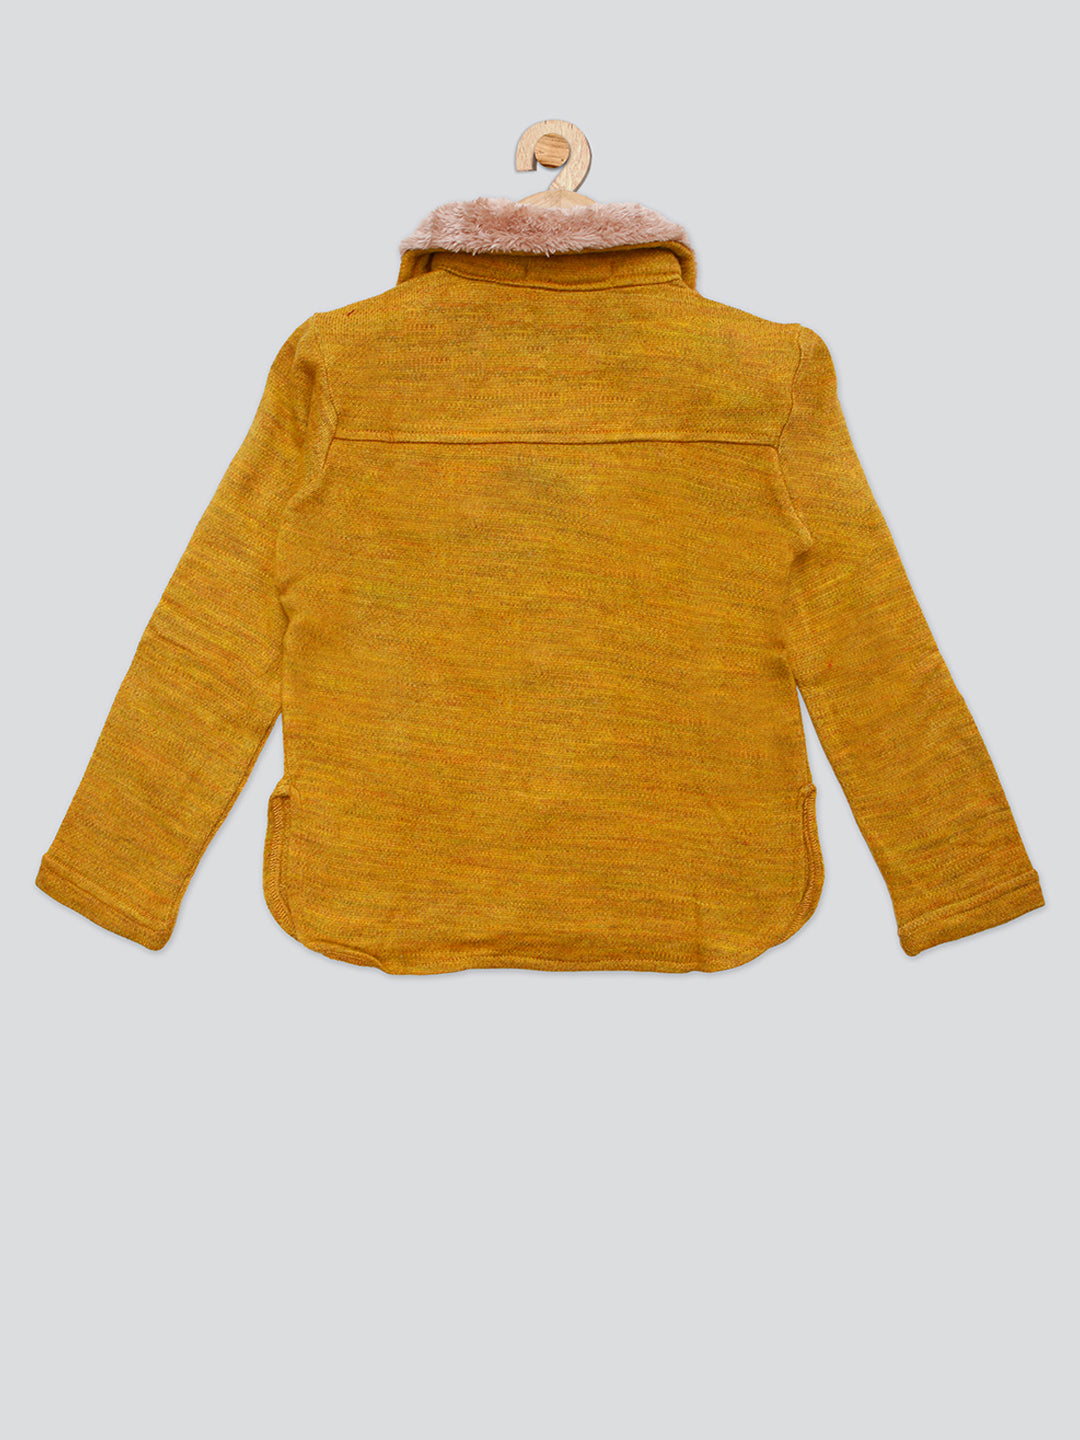 Pampolina Girls Wollen Top With Collar-Mustard